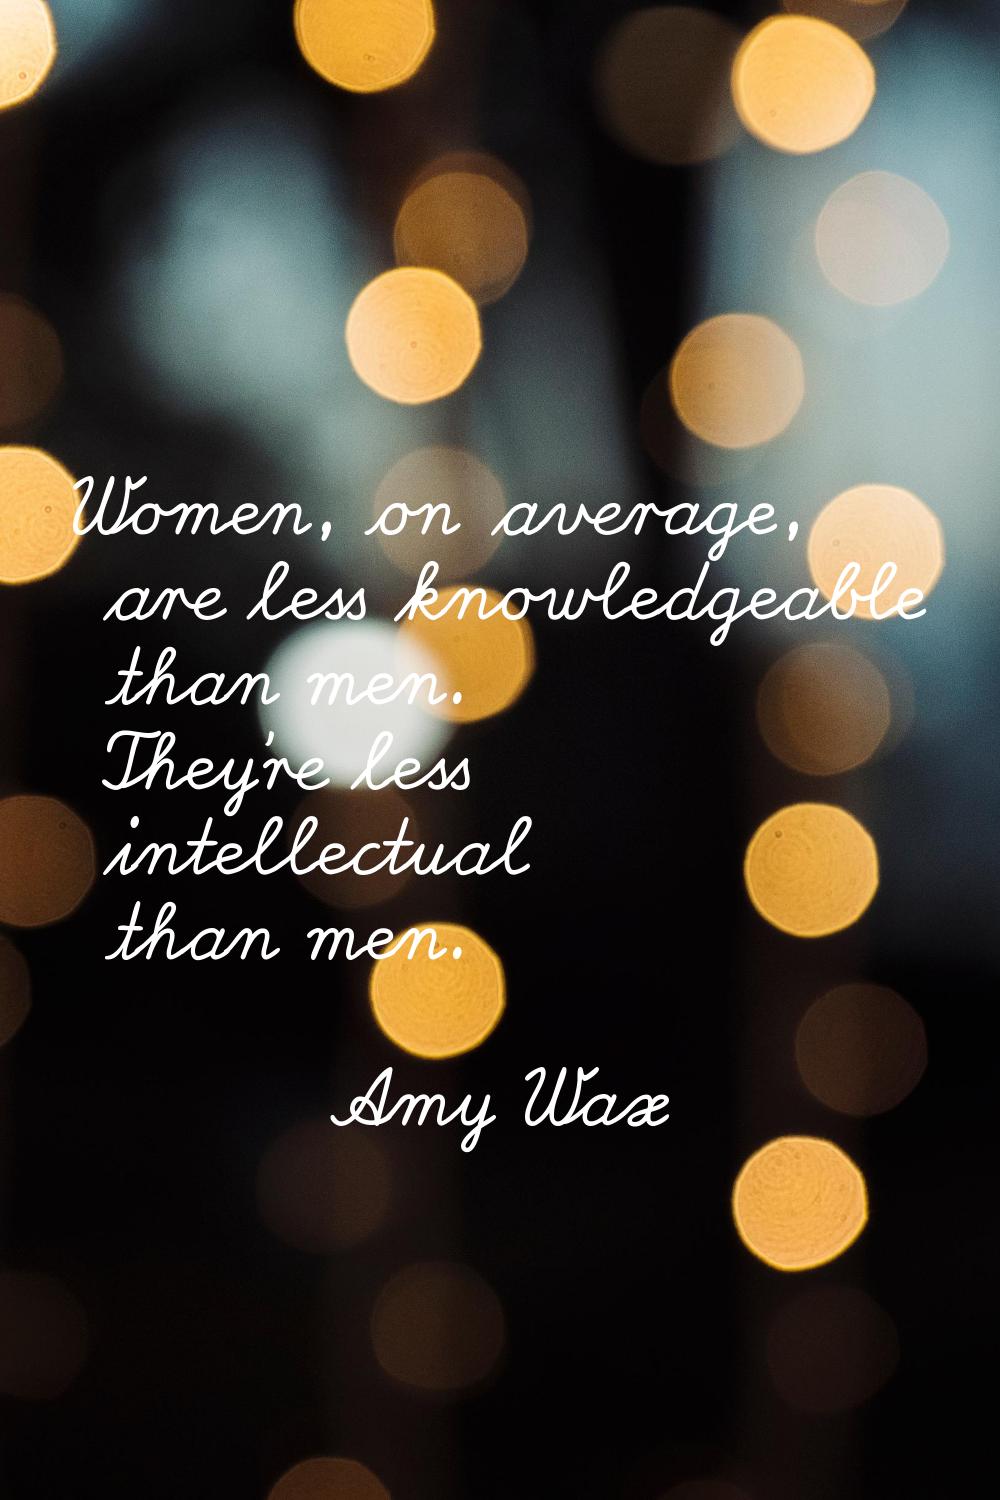 Women, on average, are less knowledgeable than men. They're less intellectual than men.